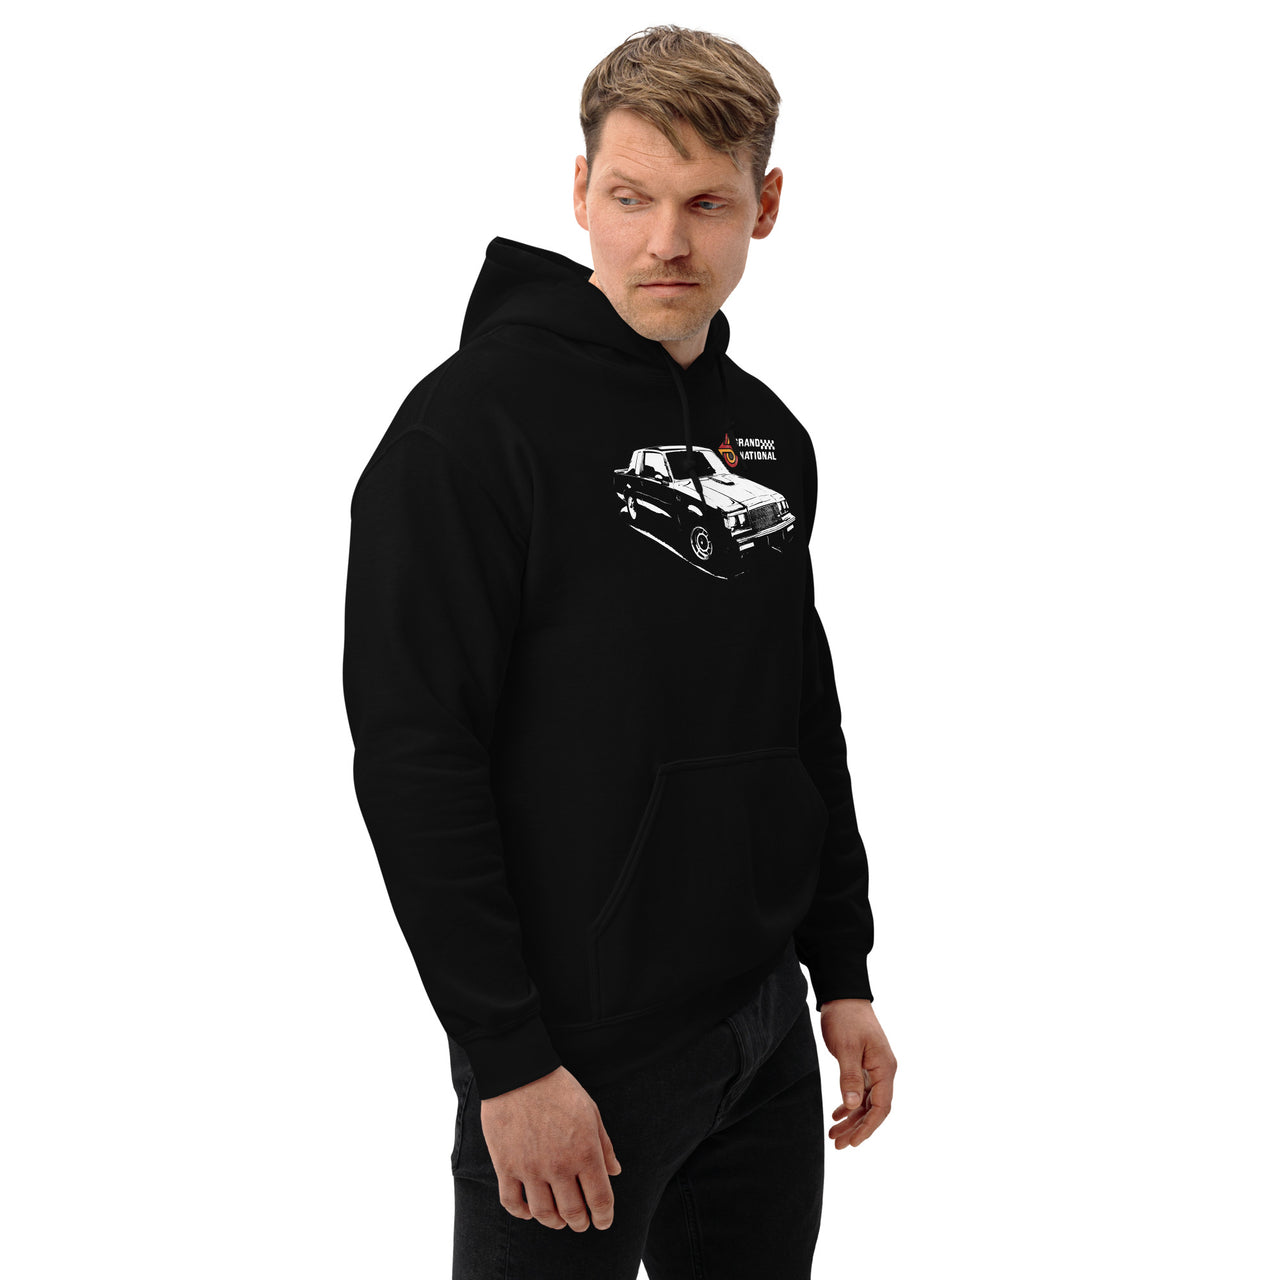 Grand National Hooded Sweatshirt Hoodie modeled from the left